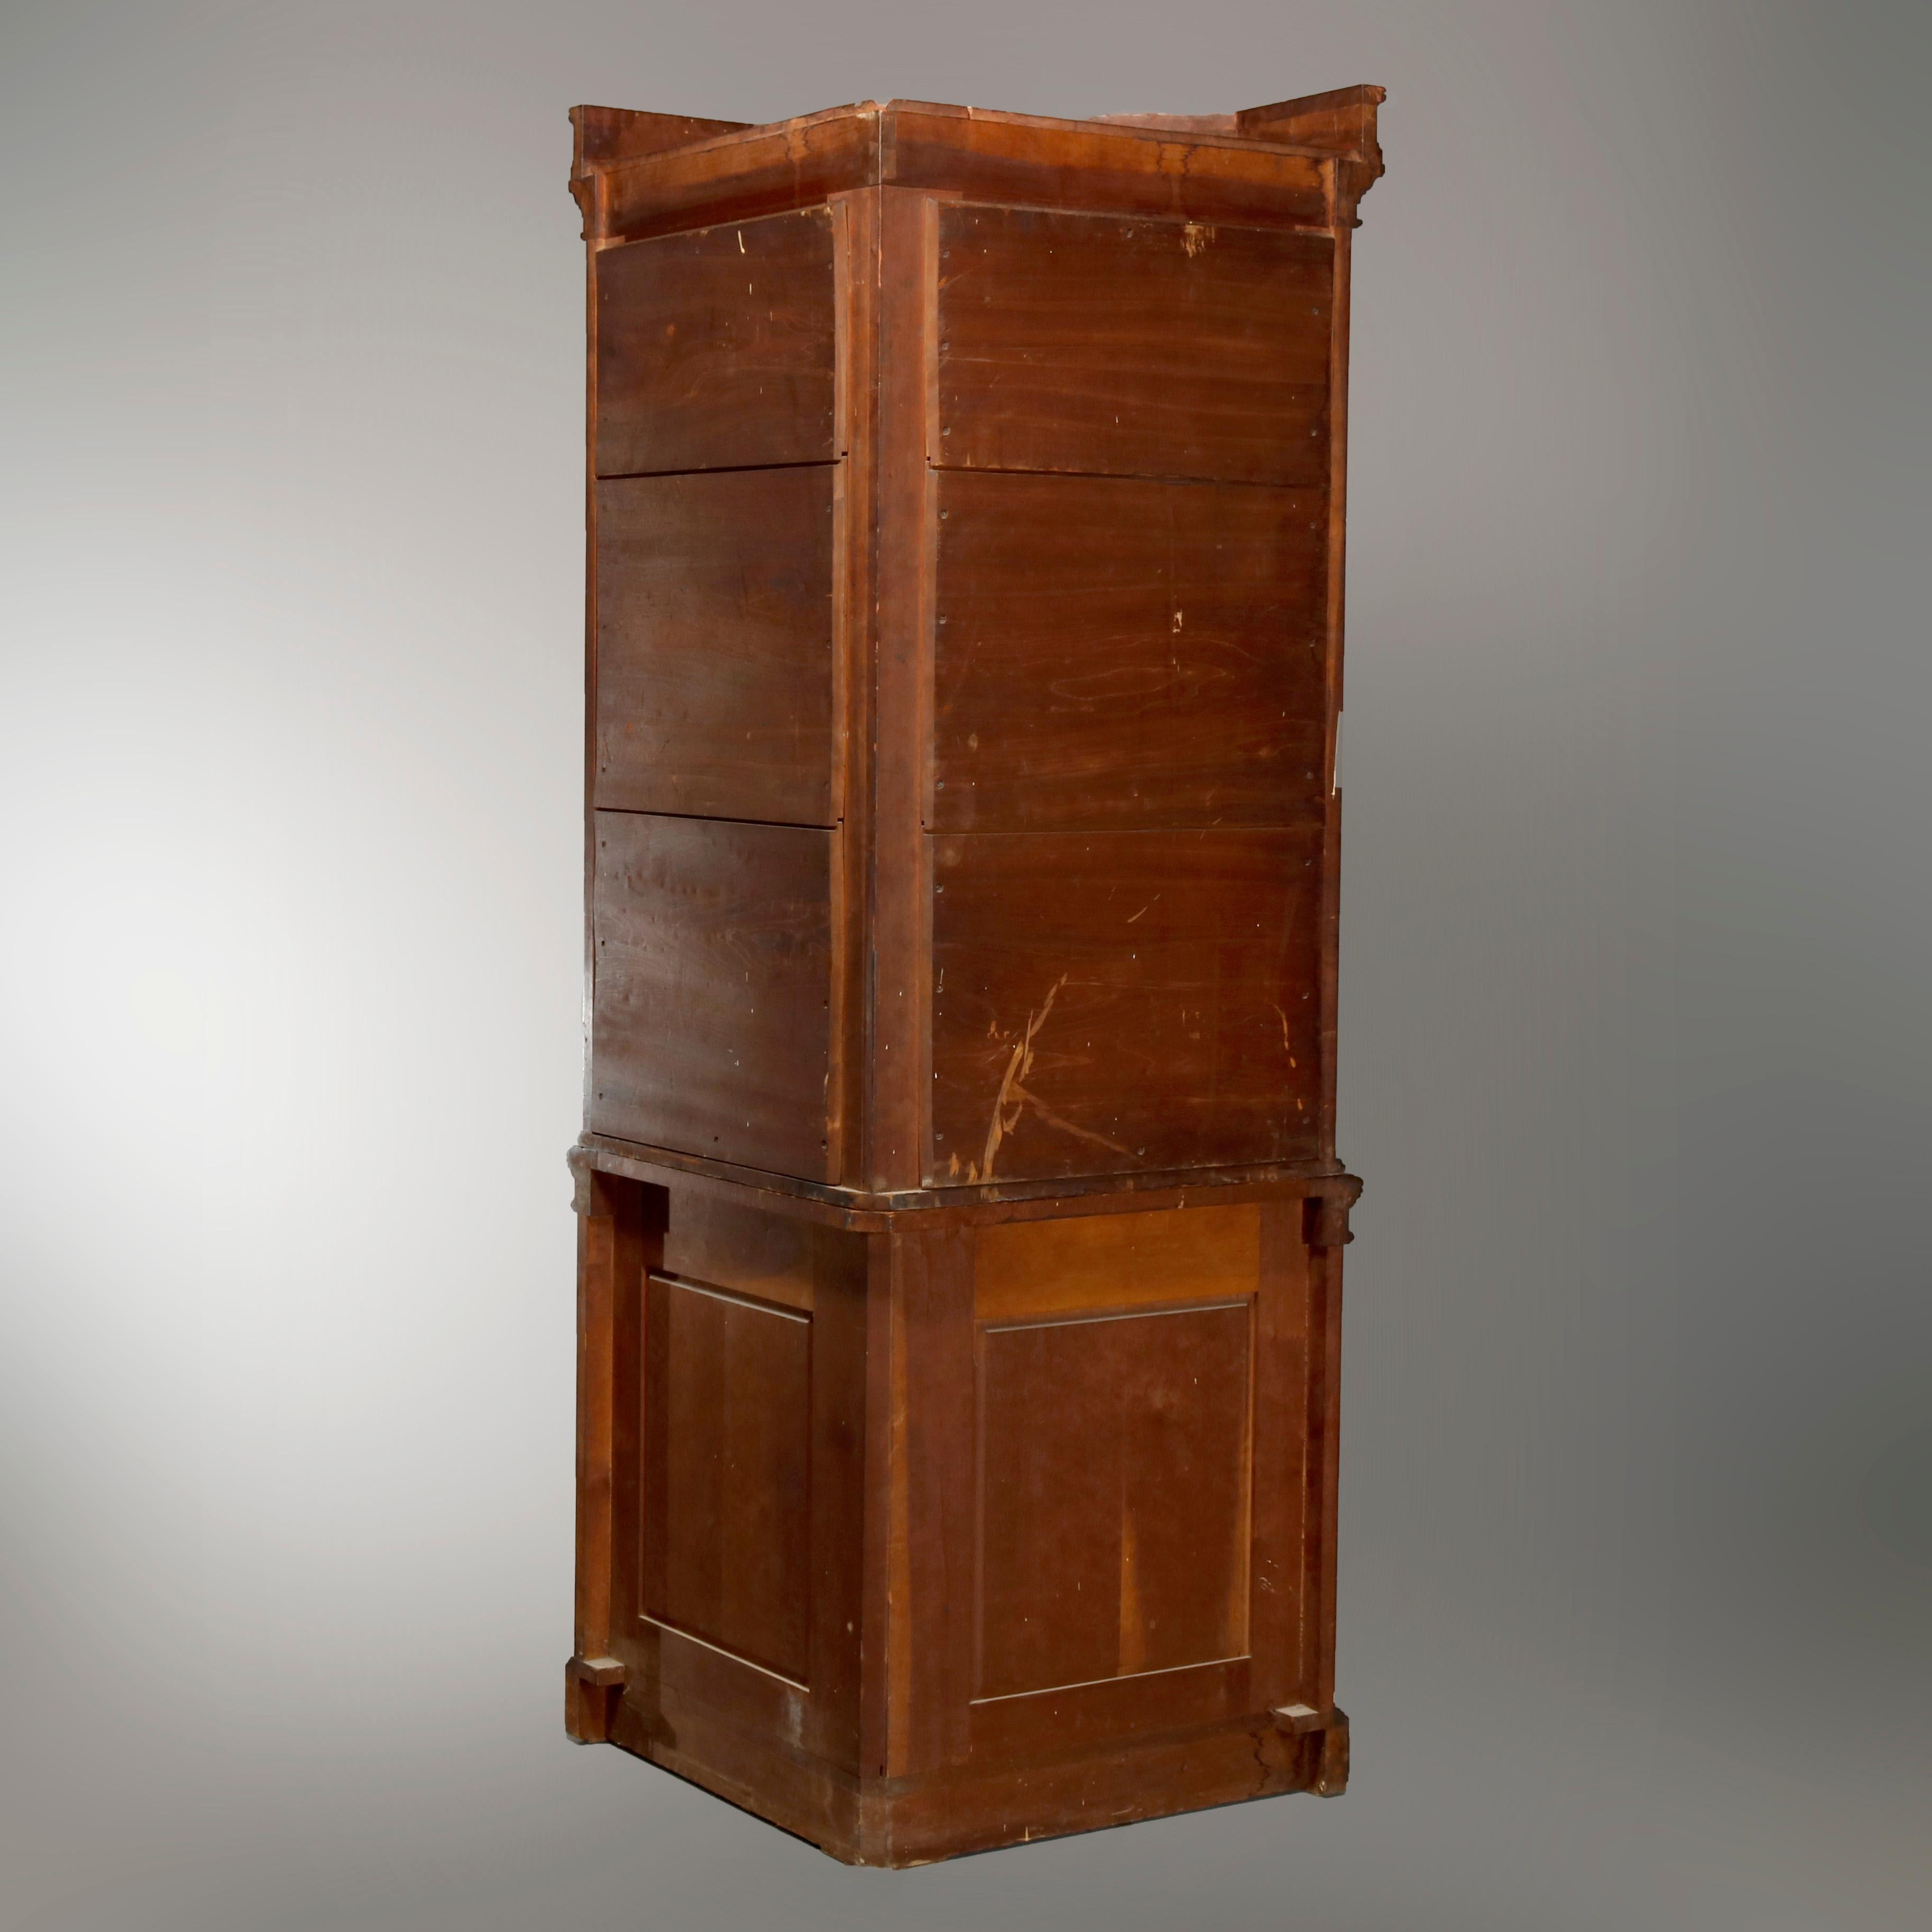 Antique Aesthetic Movement Carved Cherry Faceted & Mirrored Corner Cabinet c1890 For Sale 7